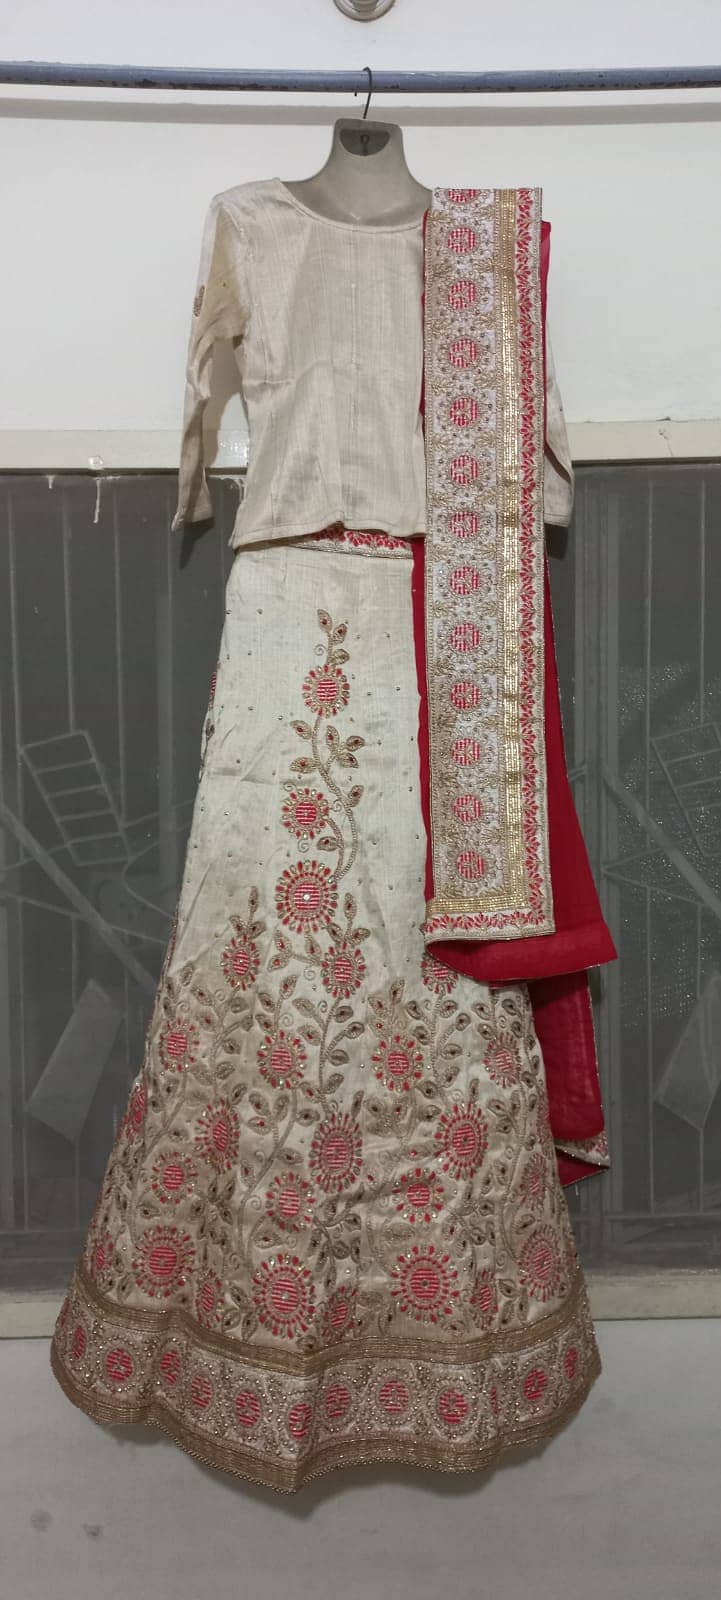 Pure indian lehanga choli new never wore  Red and fawn color  Size med 3